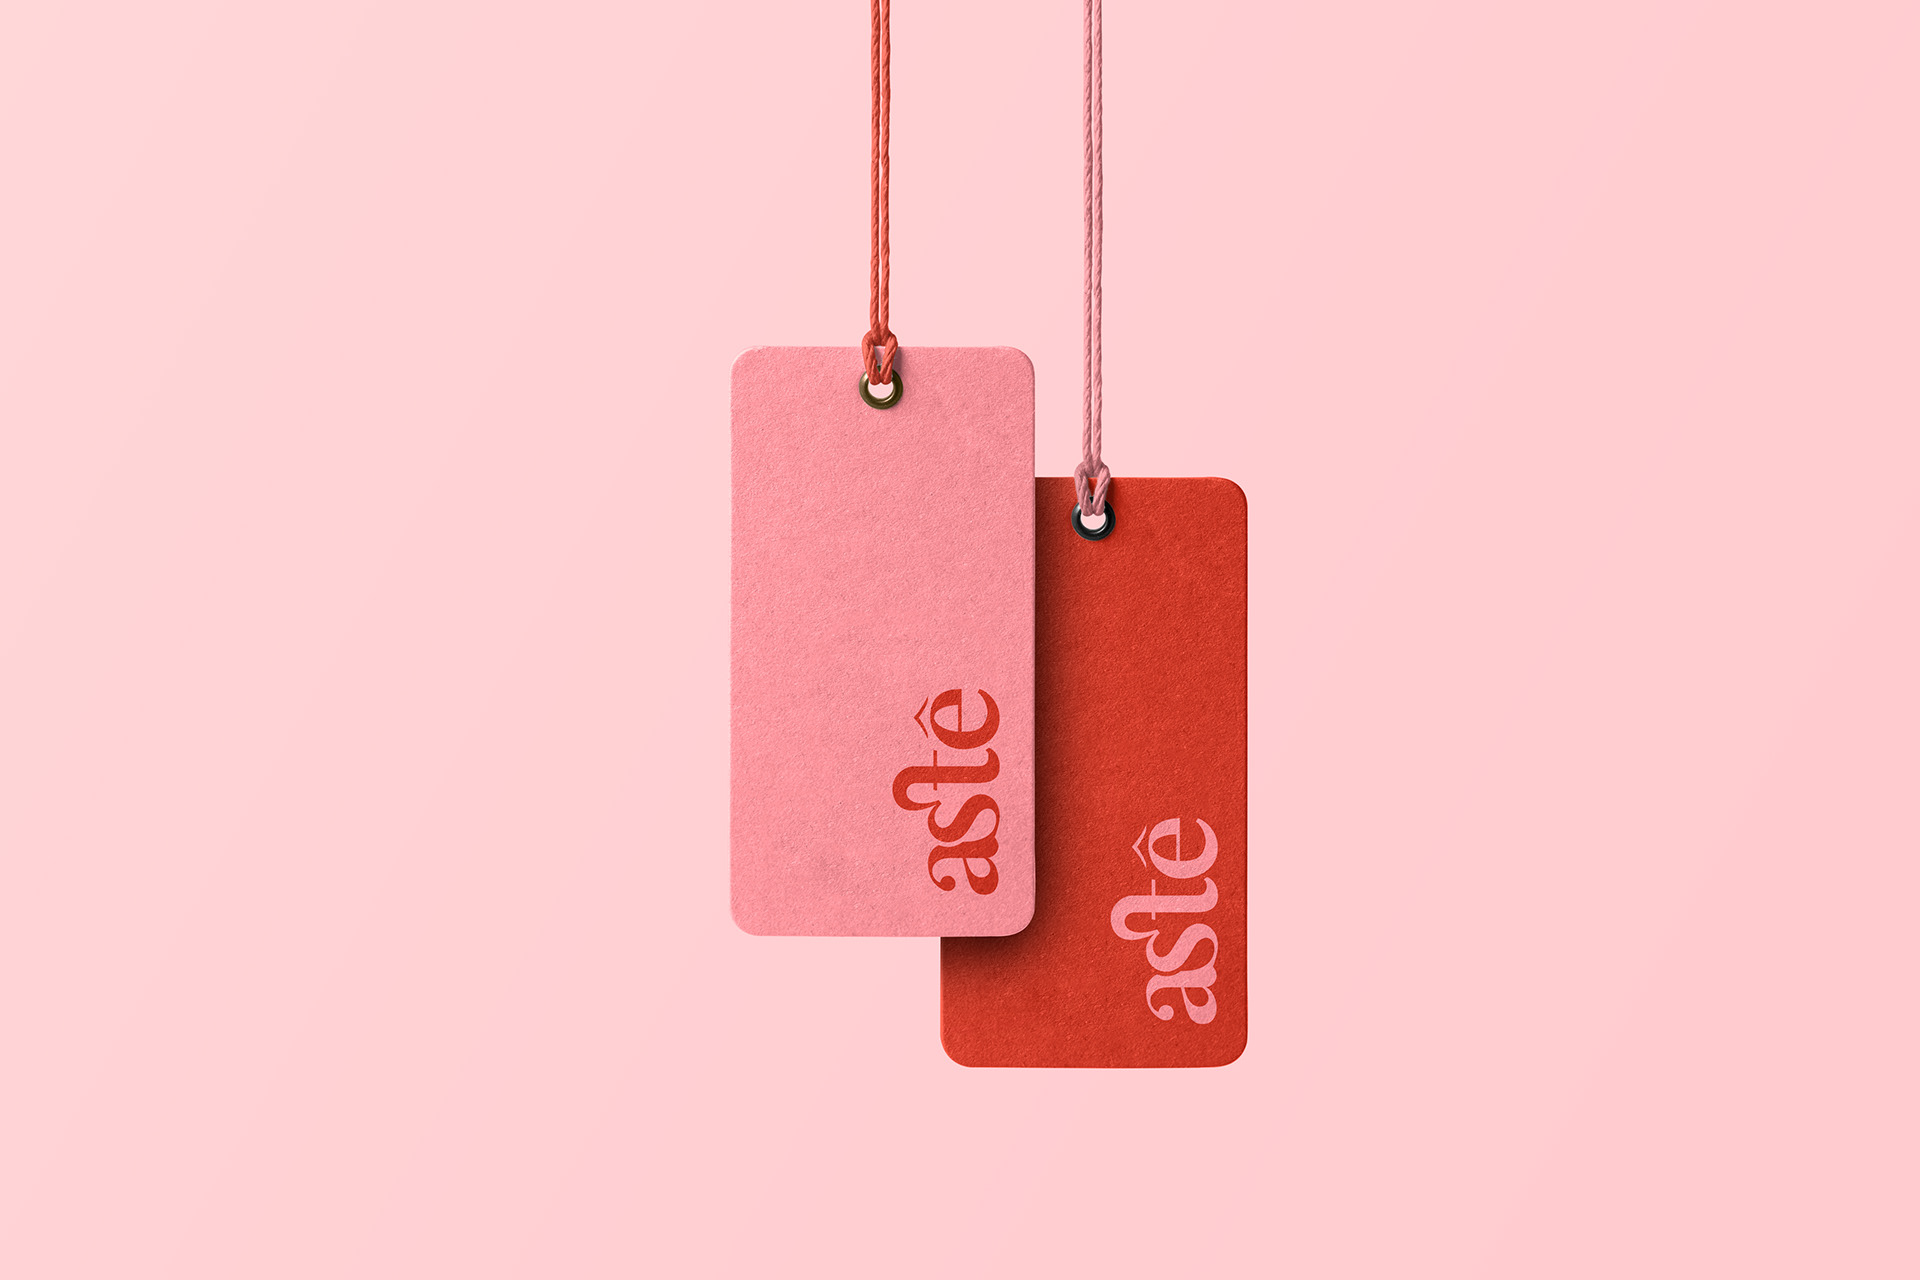 Two hanging price tags with branding on a pink background